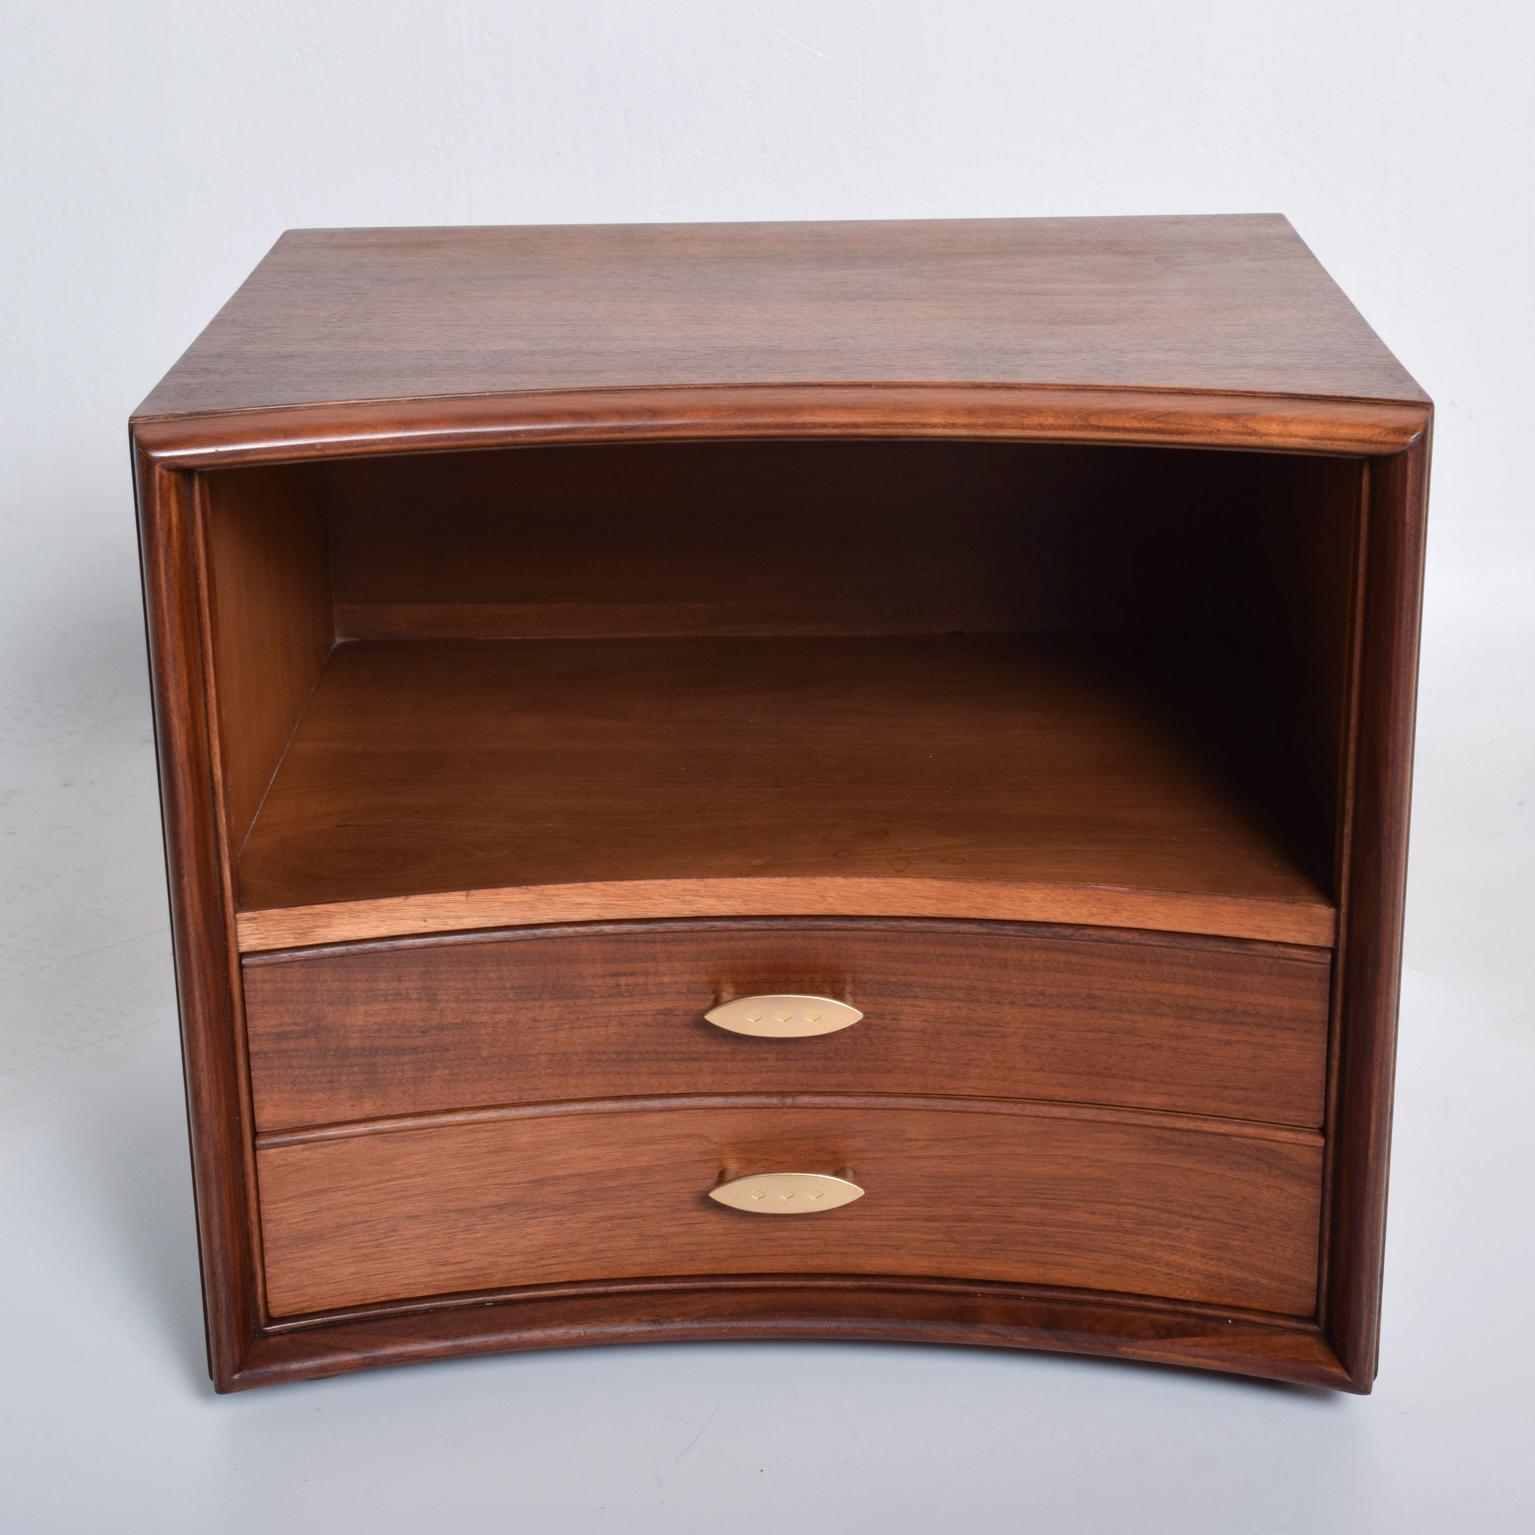 For your consideration, a Mid-Century Modern pair of curved walnut nightstands by Paul Frankl for John Stuart NY. Very unusual and rare to finds. Nightstands are constructed with the best materials. Curved fronts with double dovetail construction.